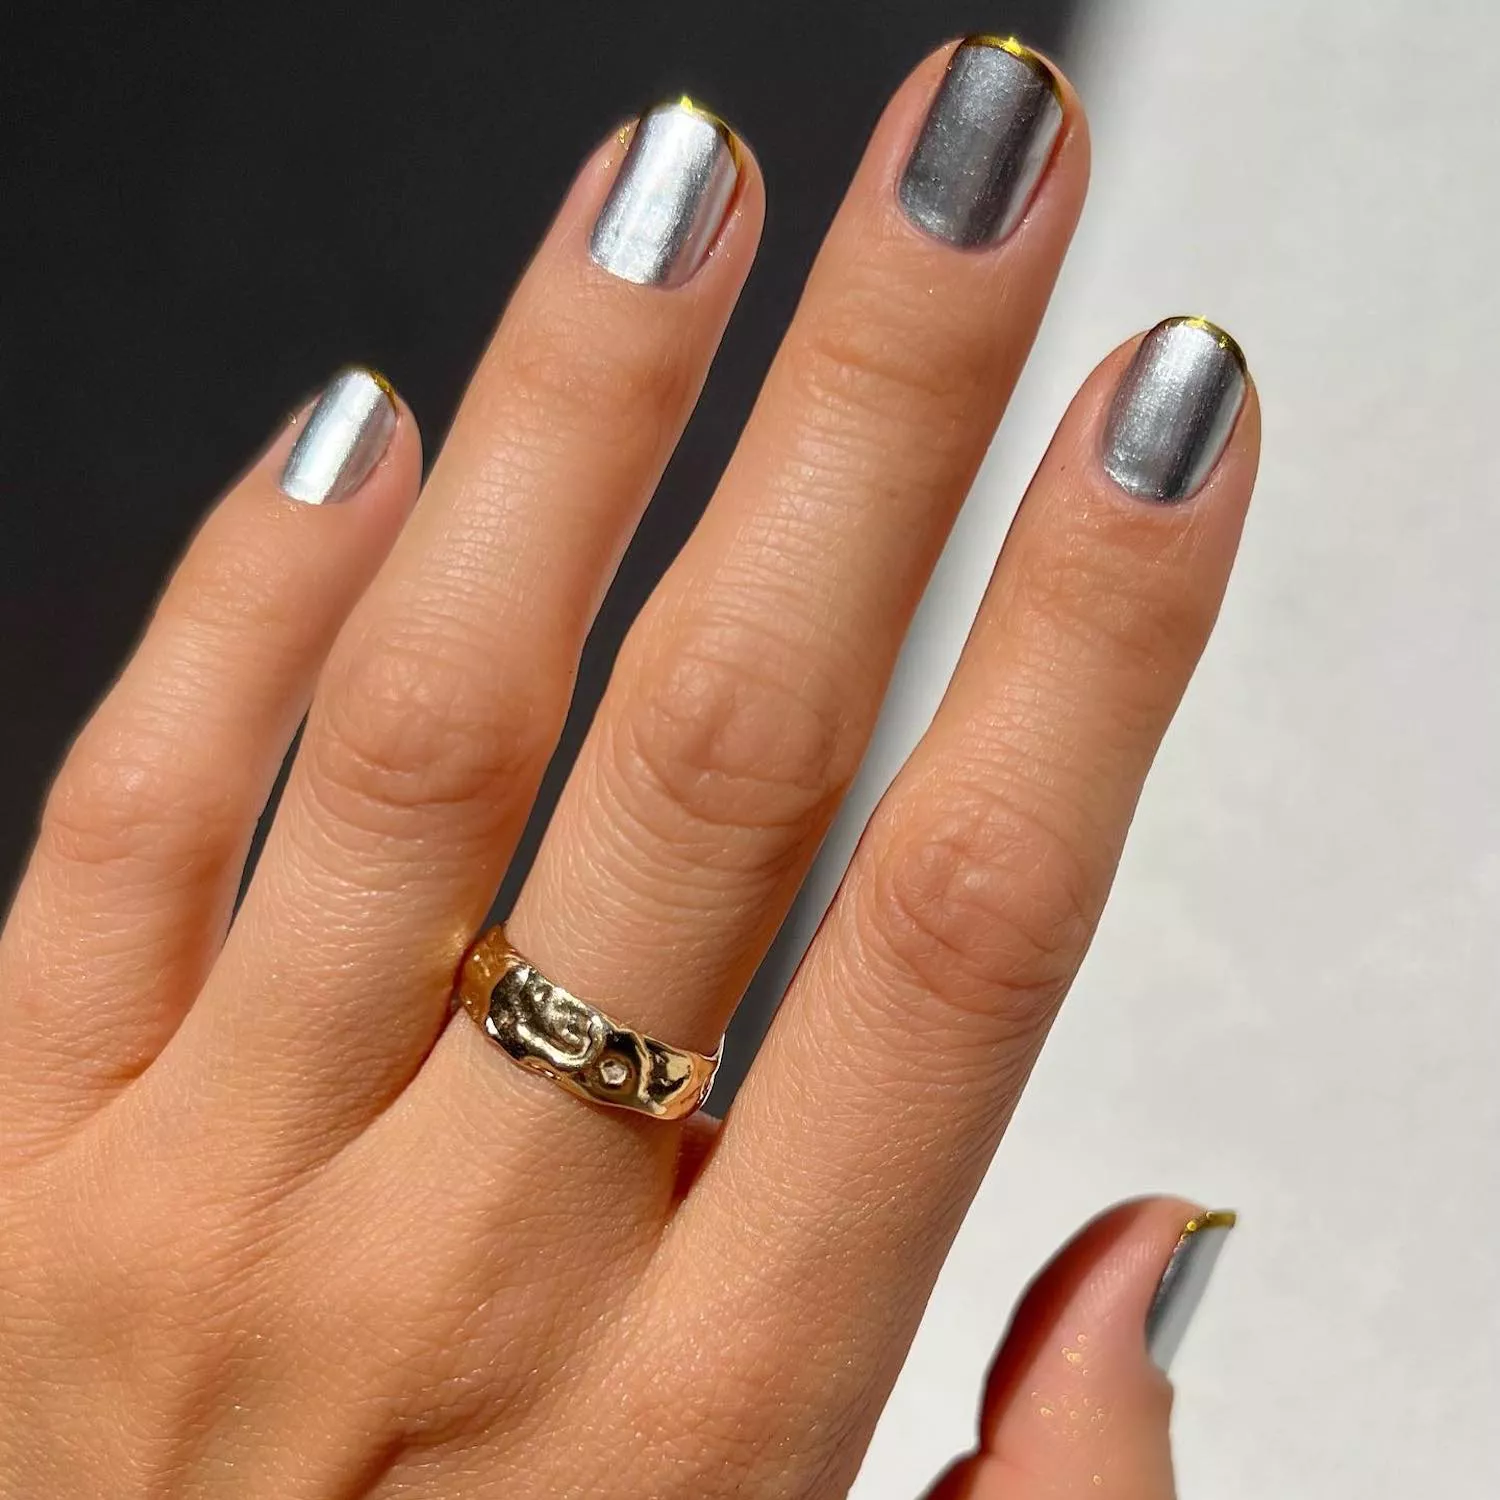 Silver chrome nails with gold baby French tips